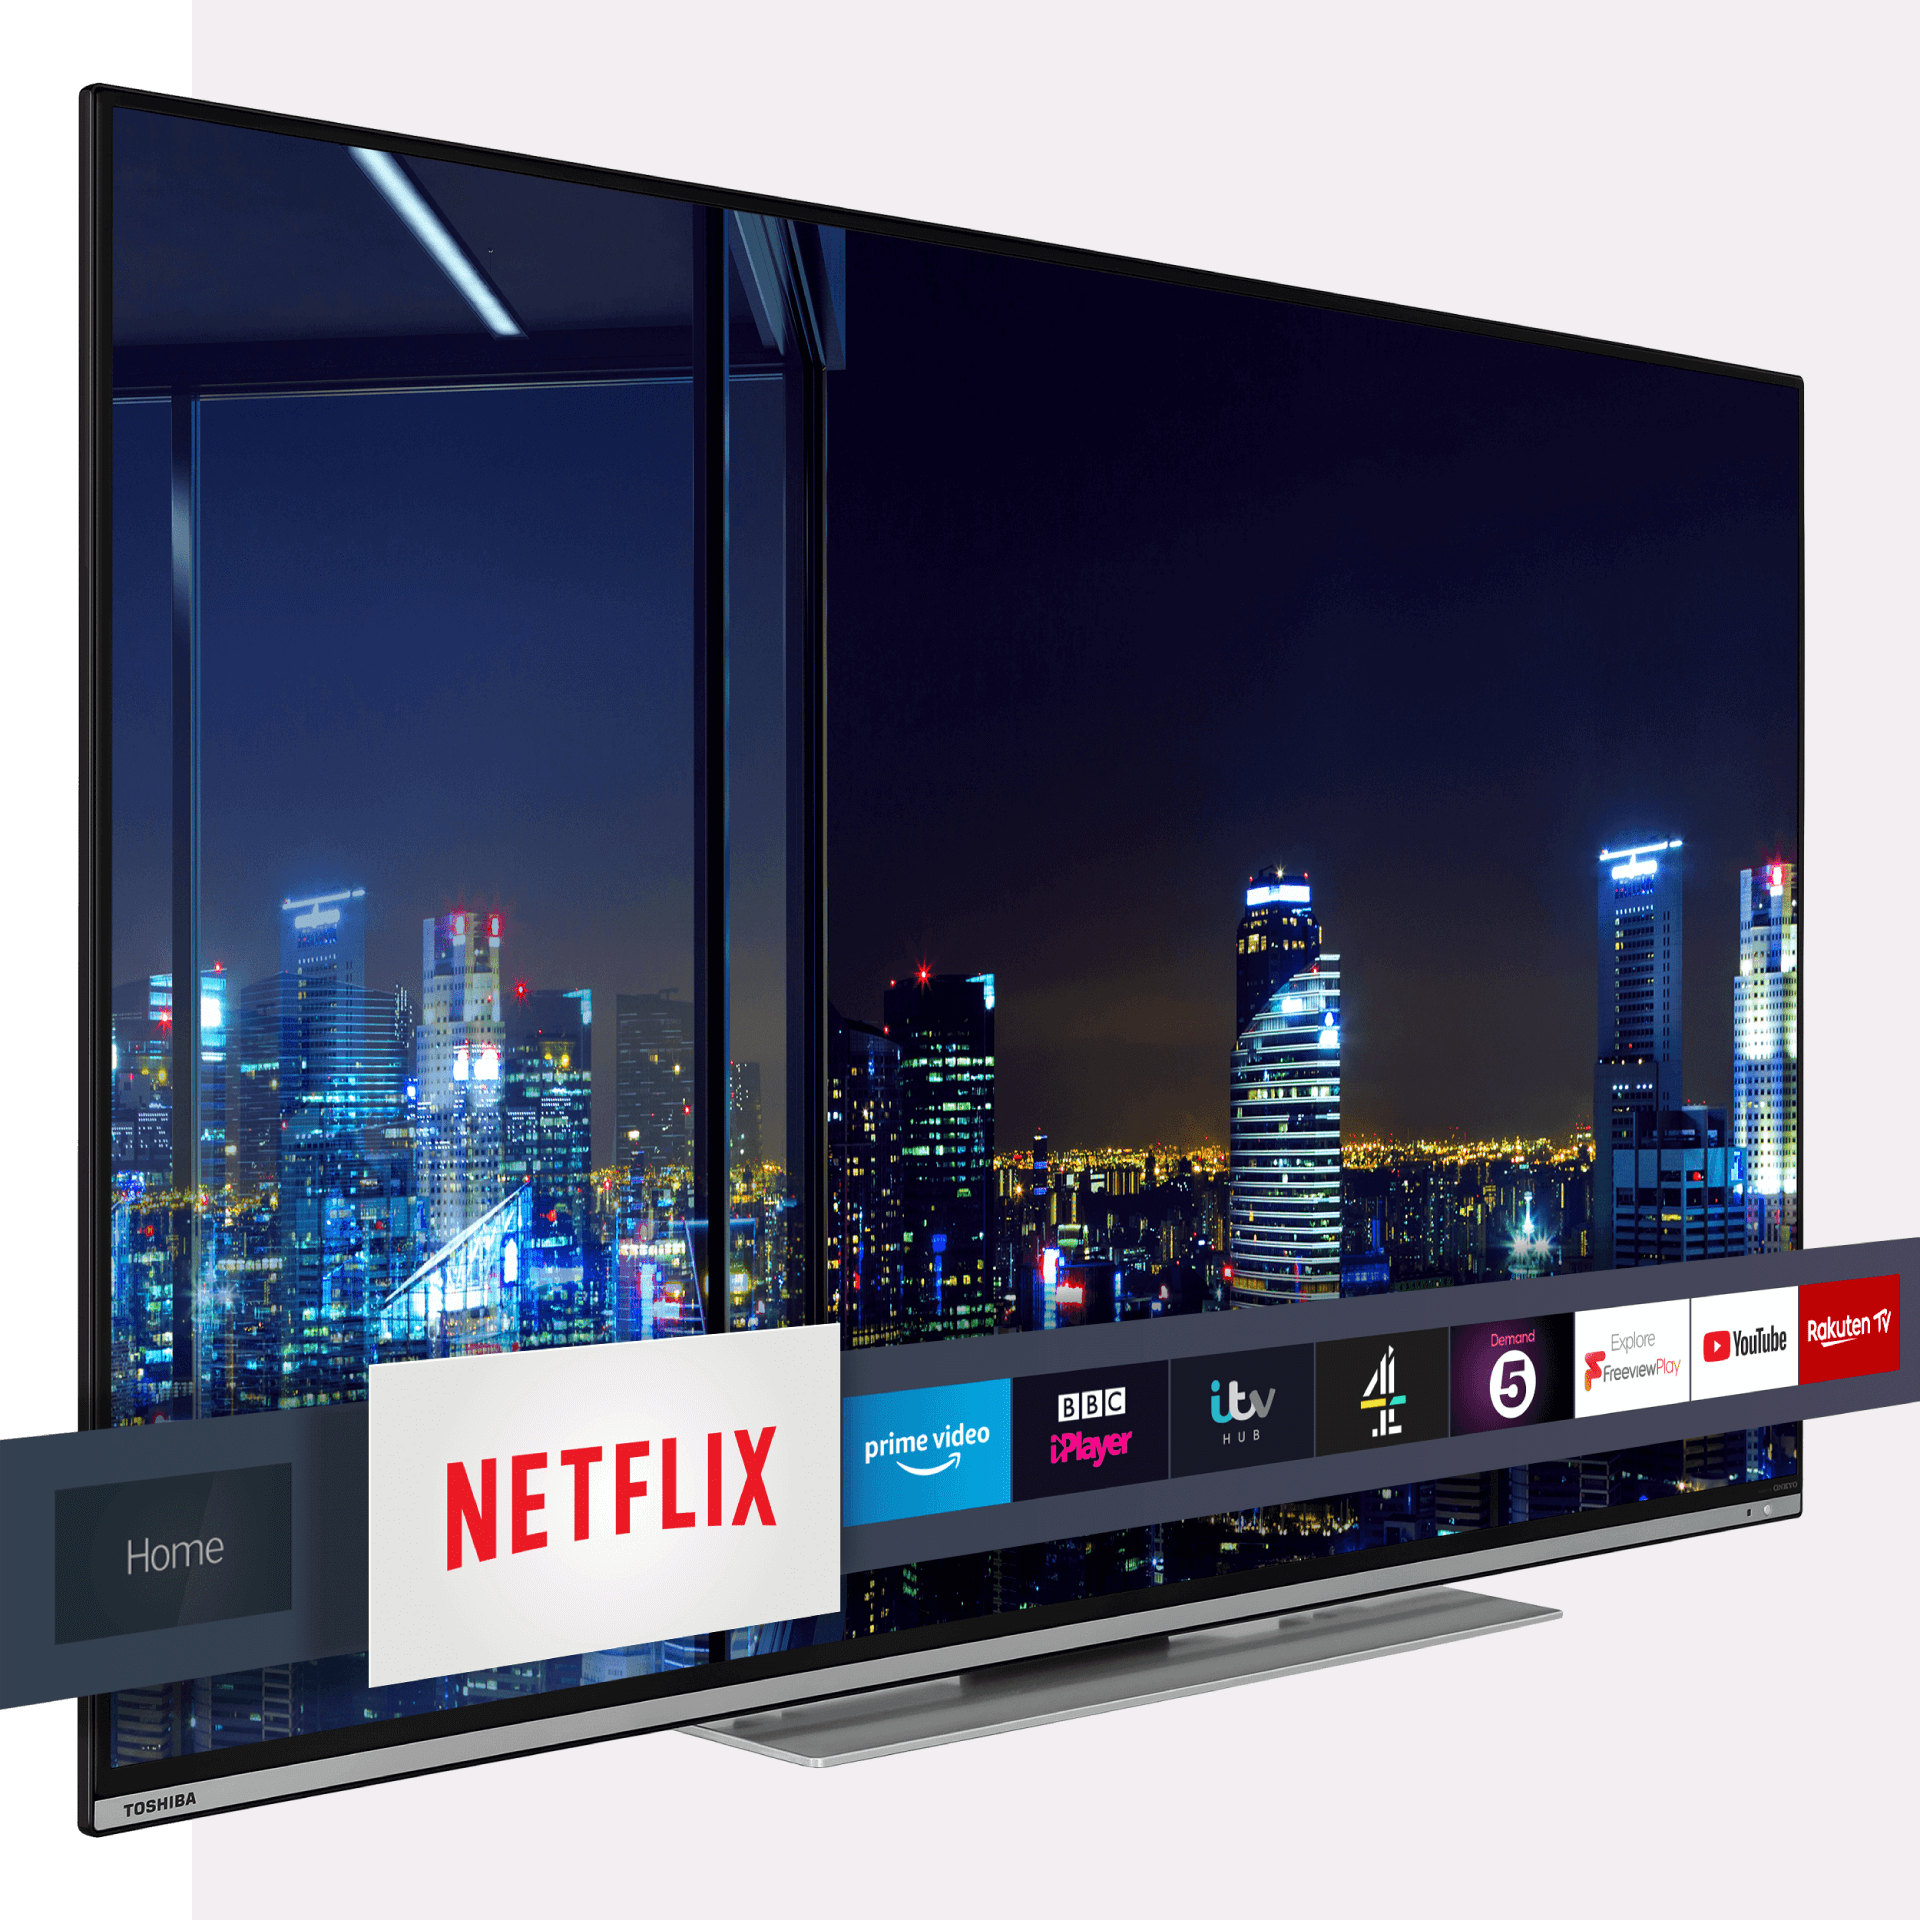 Toshiba TV with netflix and other channels